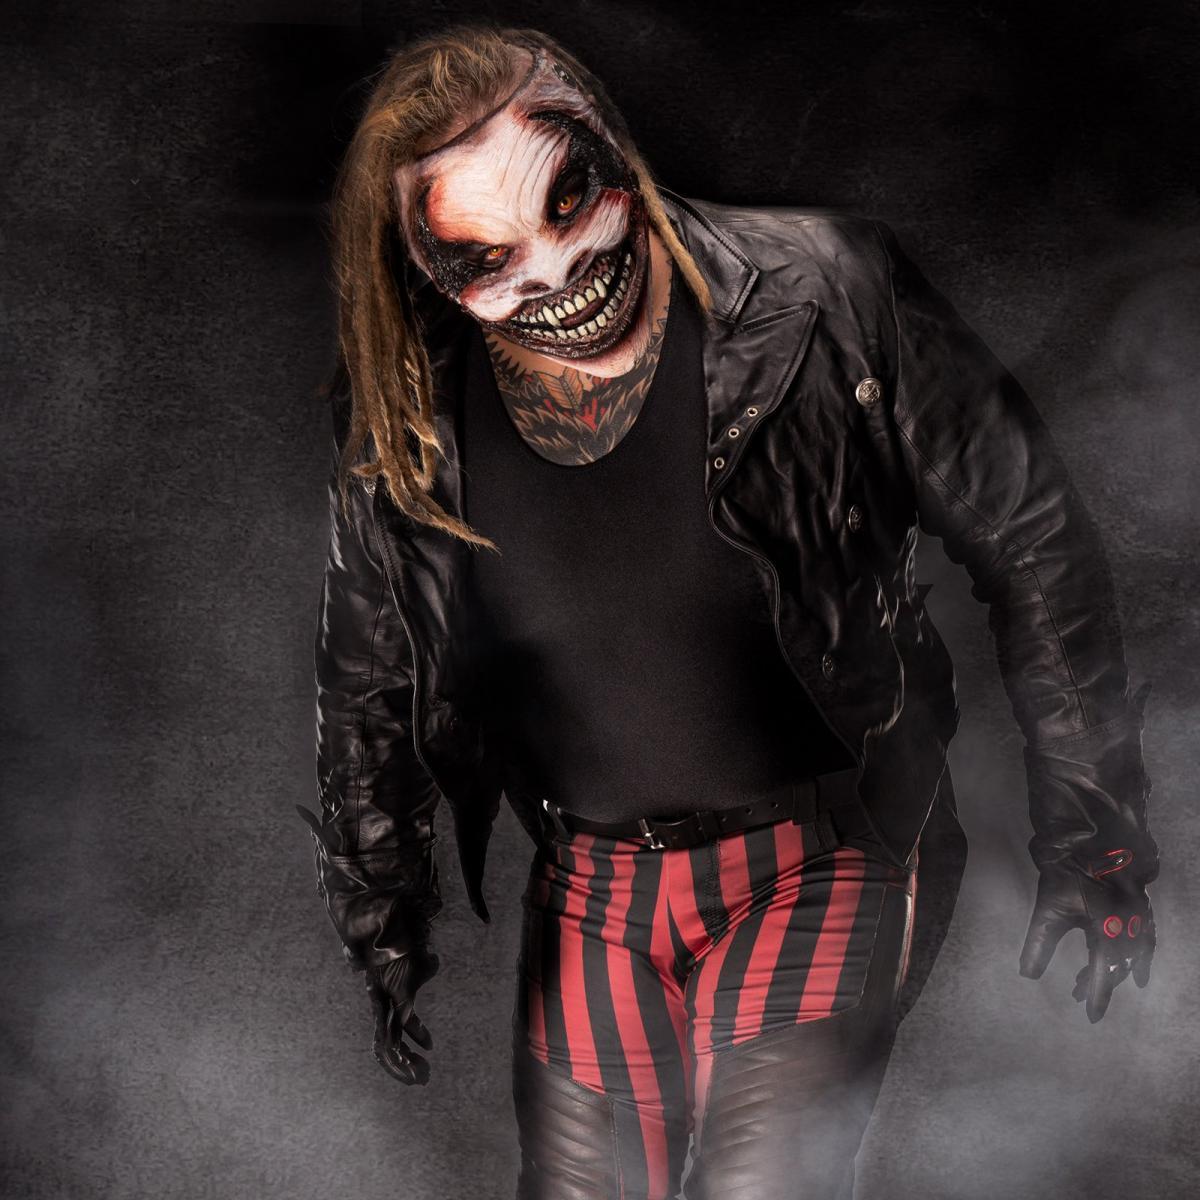 New Bray Wyatt Wallpapers HD 4K Ultra HD APK pour Android Télécharger